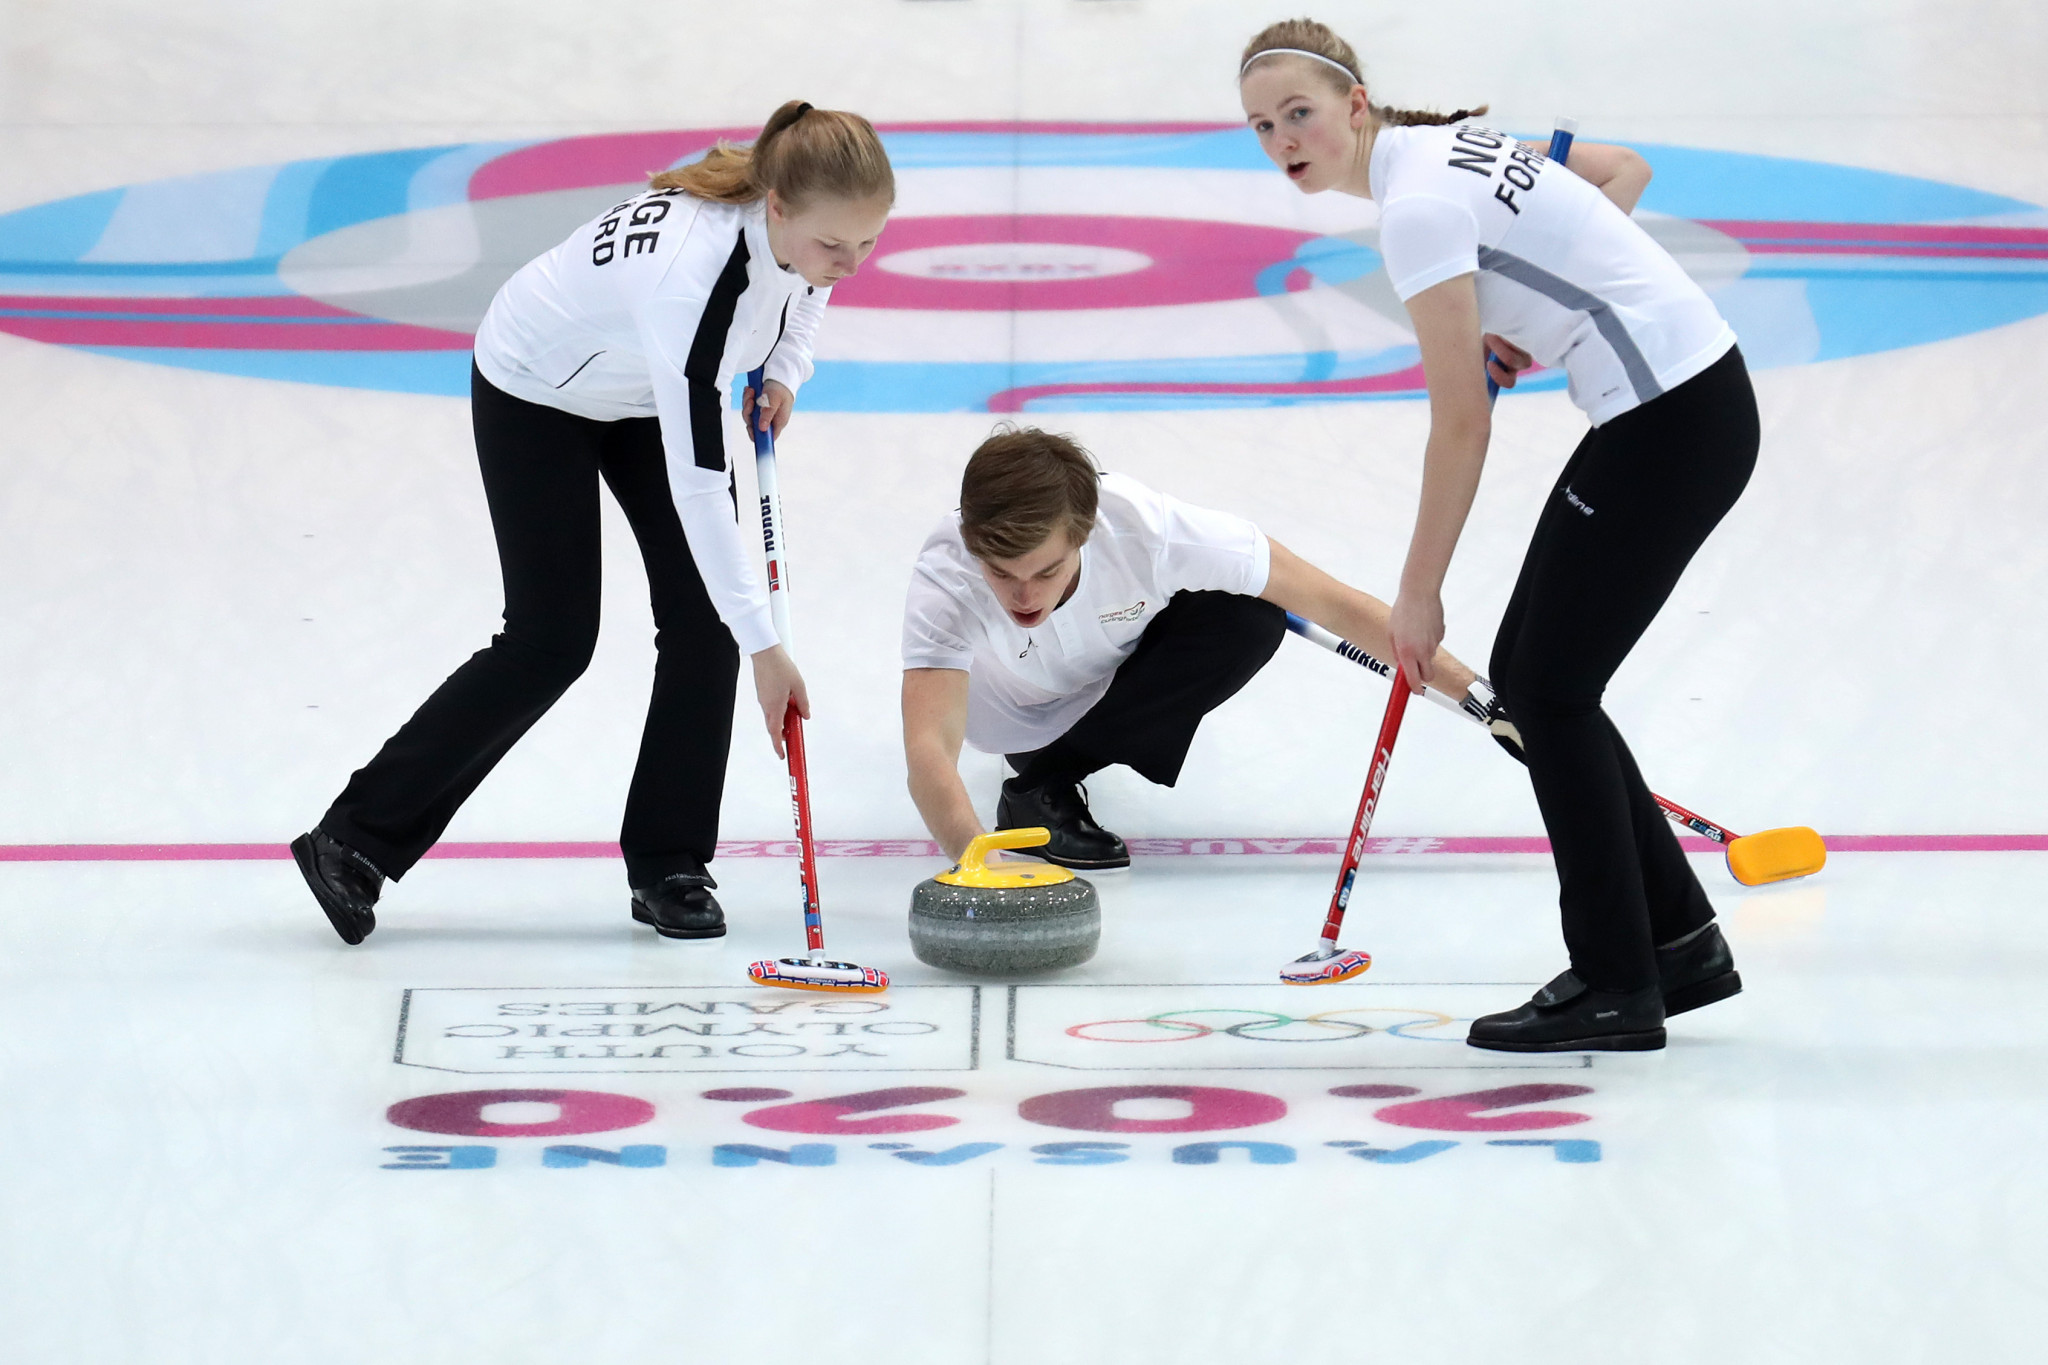 Norway beat Japan to win mixed team curling gold at Lausanne 2020